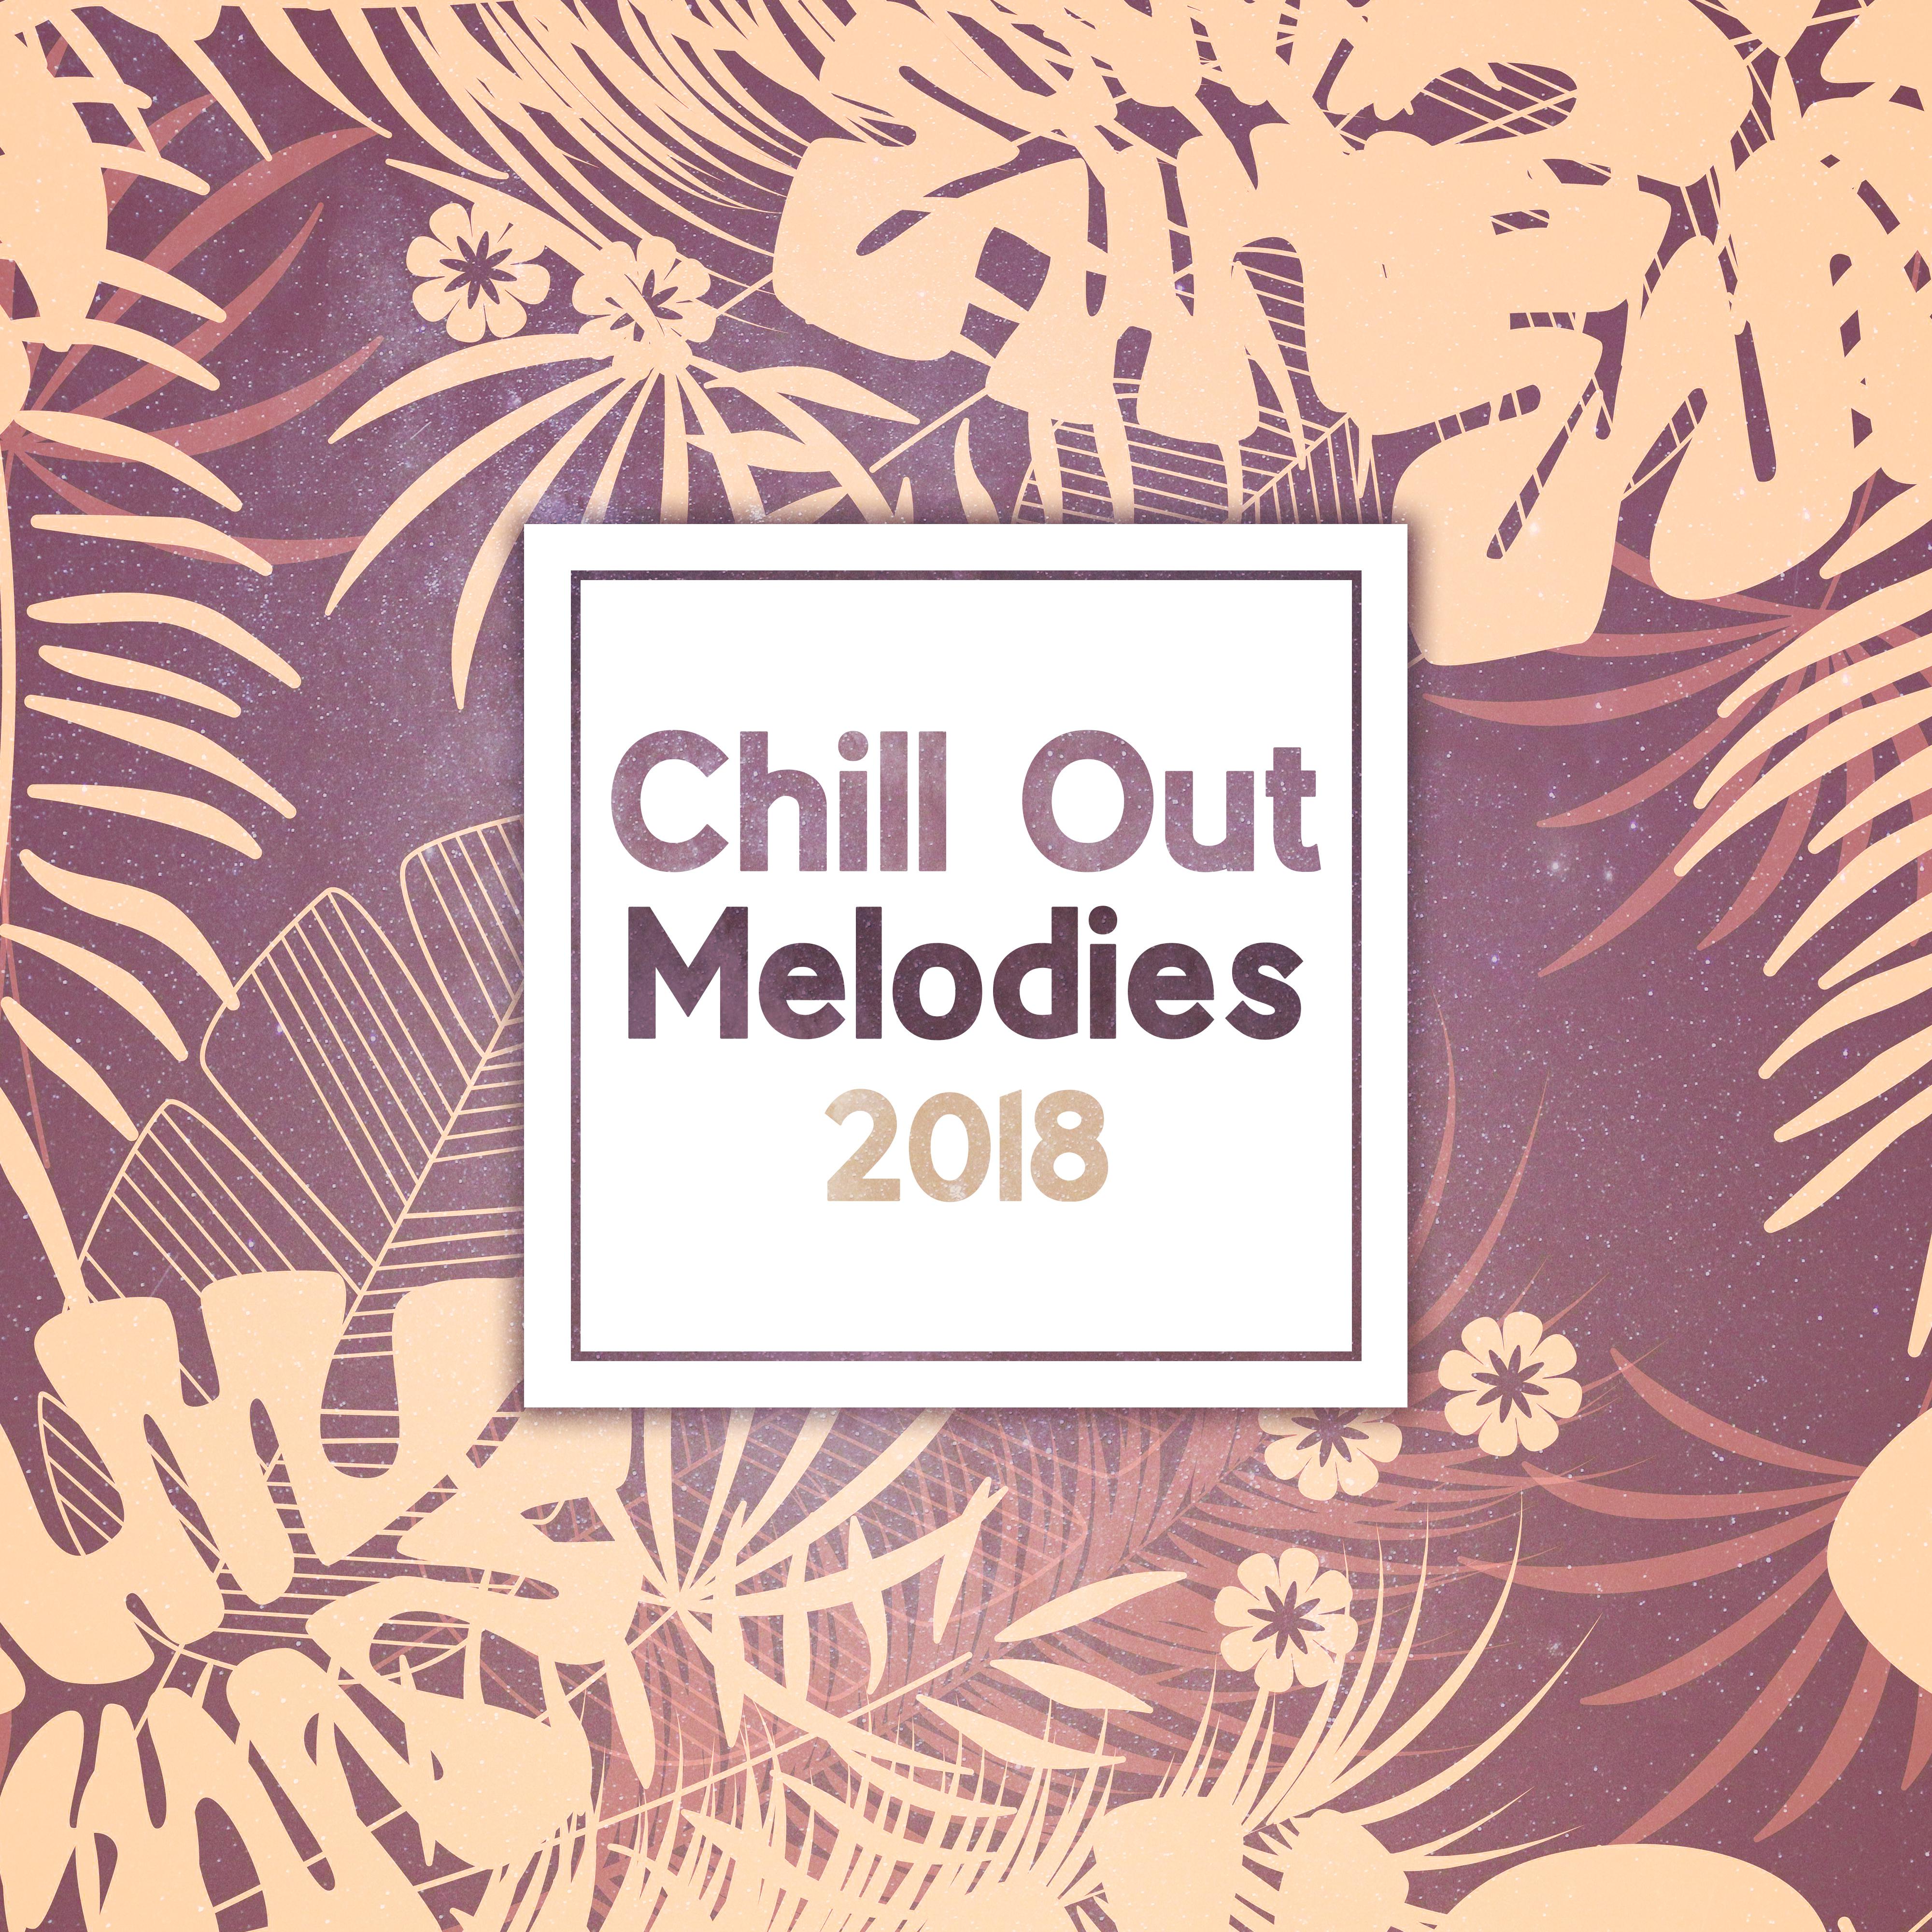 Chill Out Melodies 2018